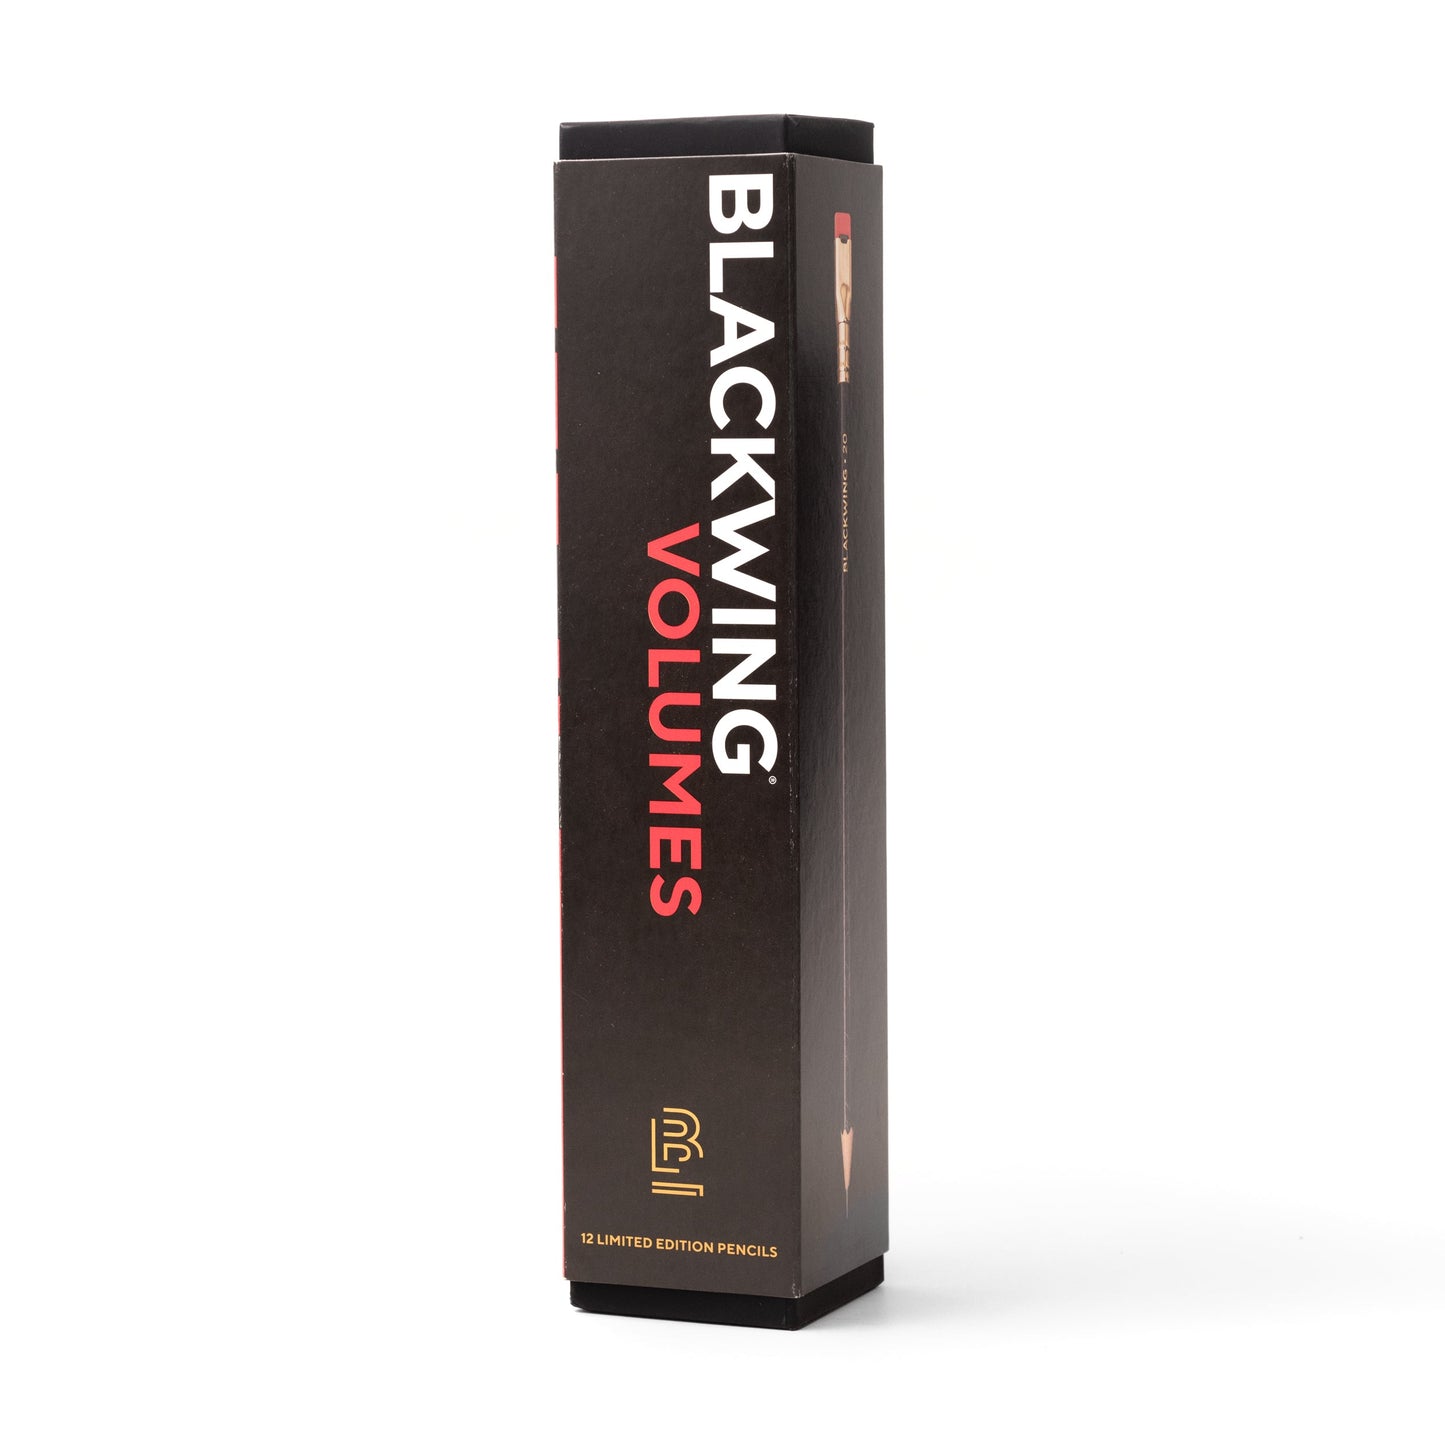 Blackwing Volumes #20 Pencils (Set of 12) - The Tabletop Gaming Pencil